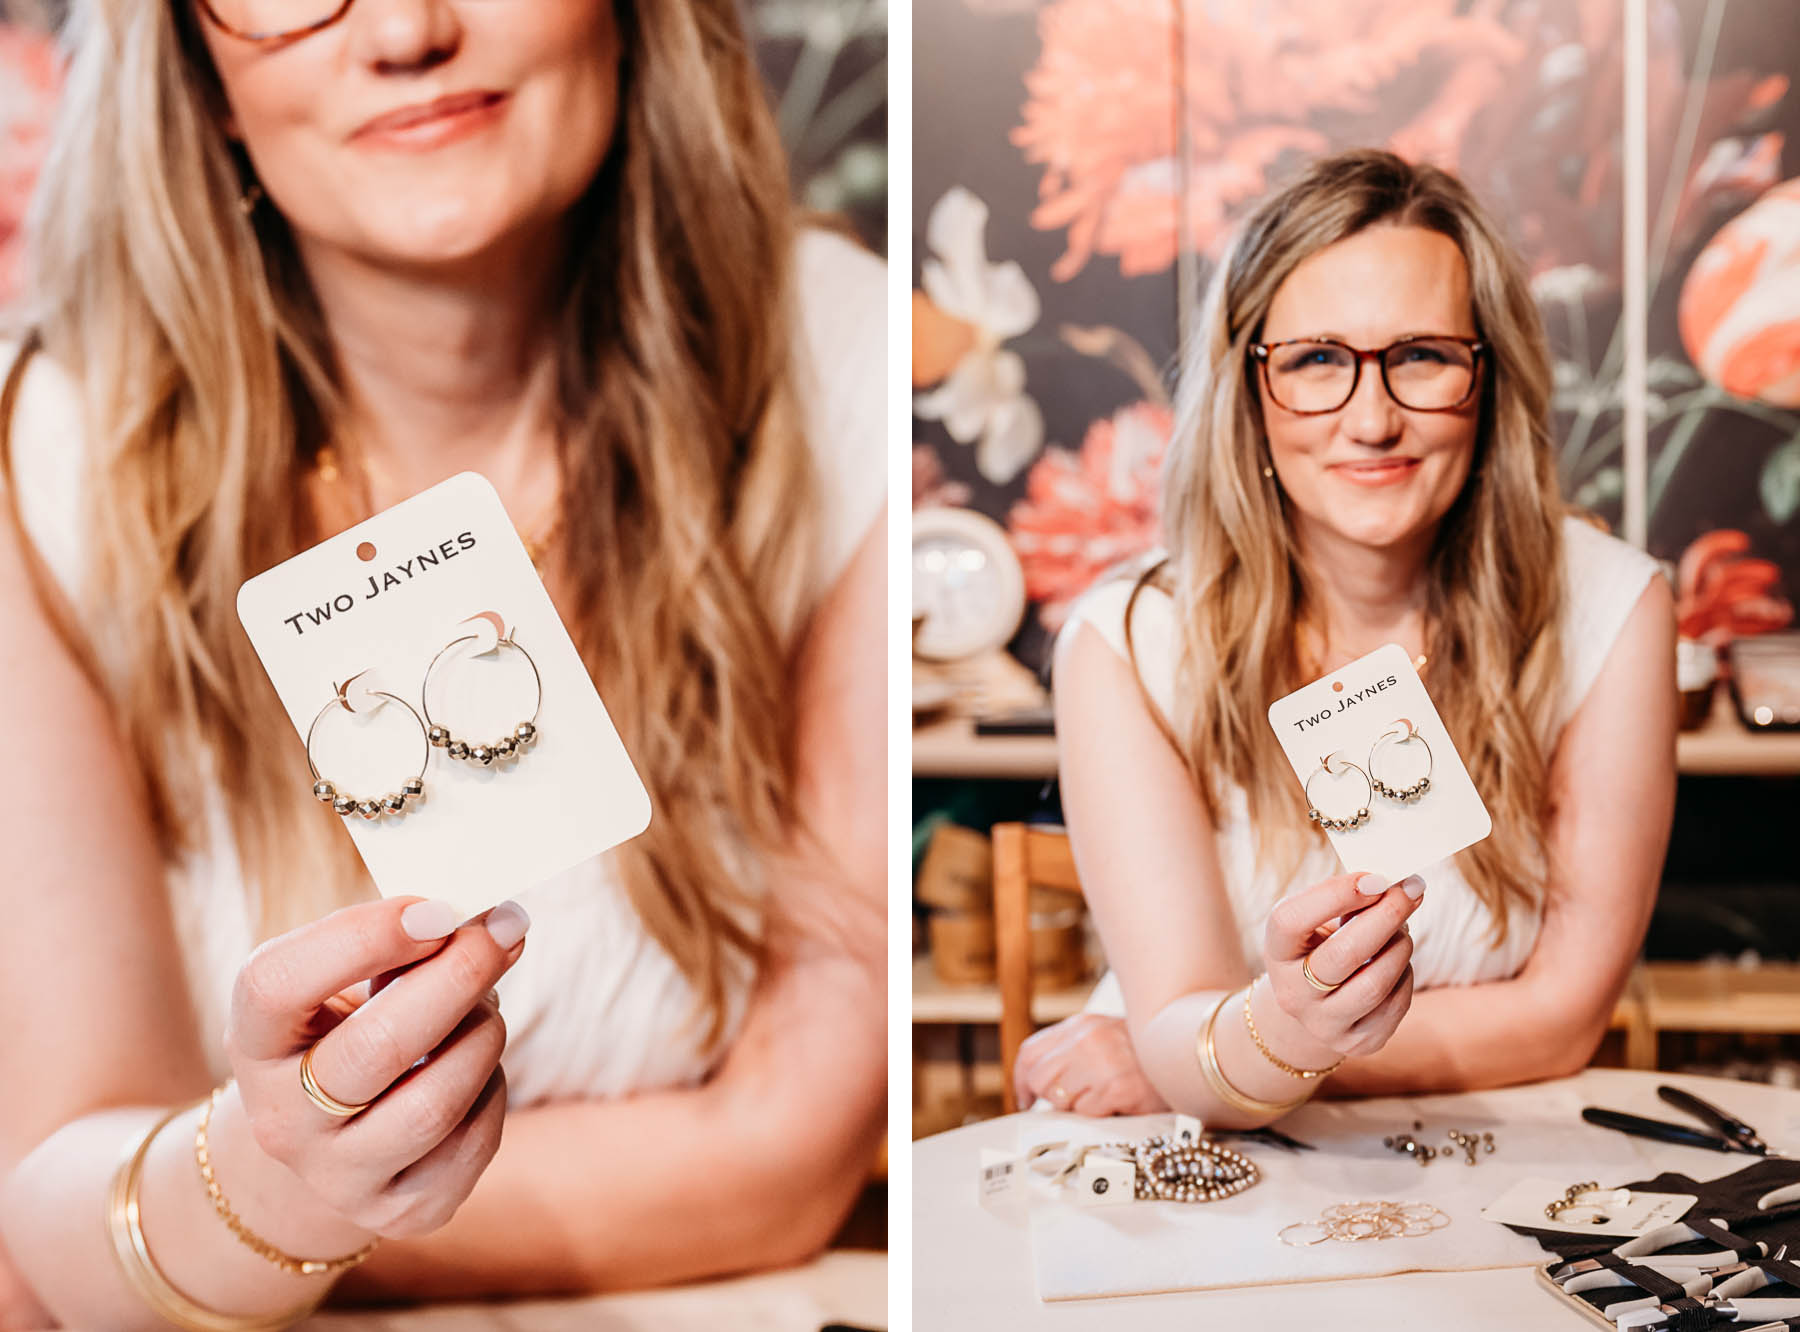 Branding photos of store owner at work making jewelry. Loudoun Market Branding Photography by Jenny Sessoms. 